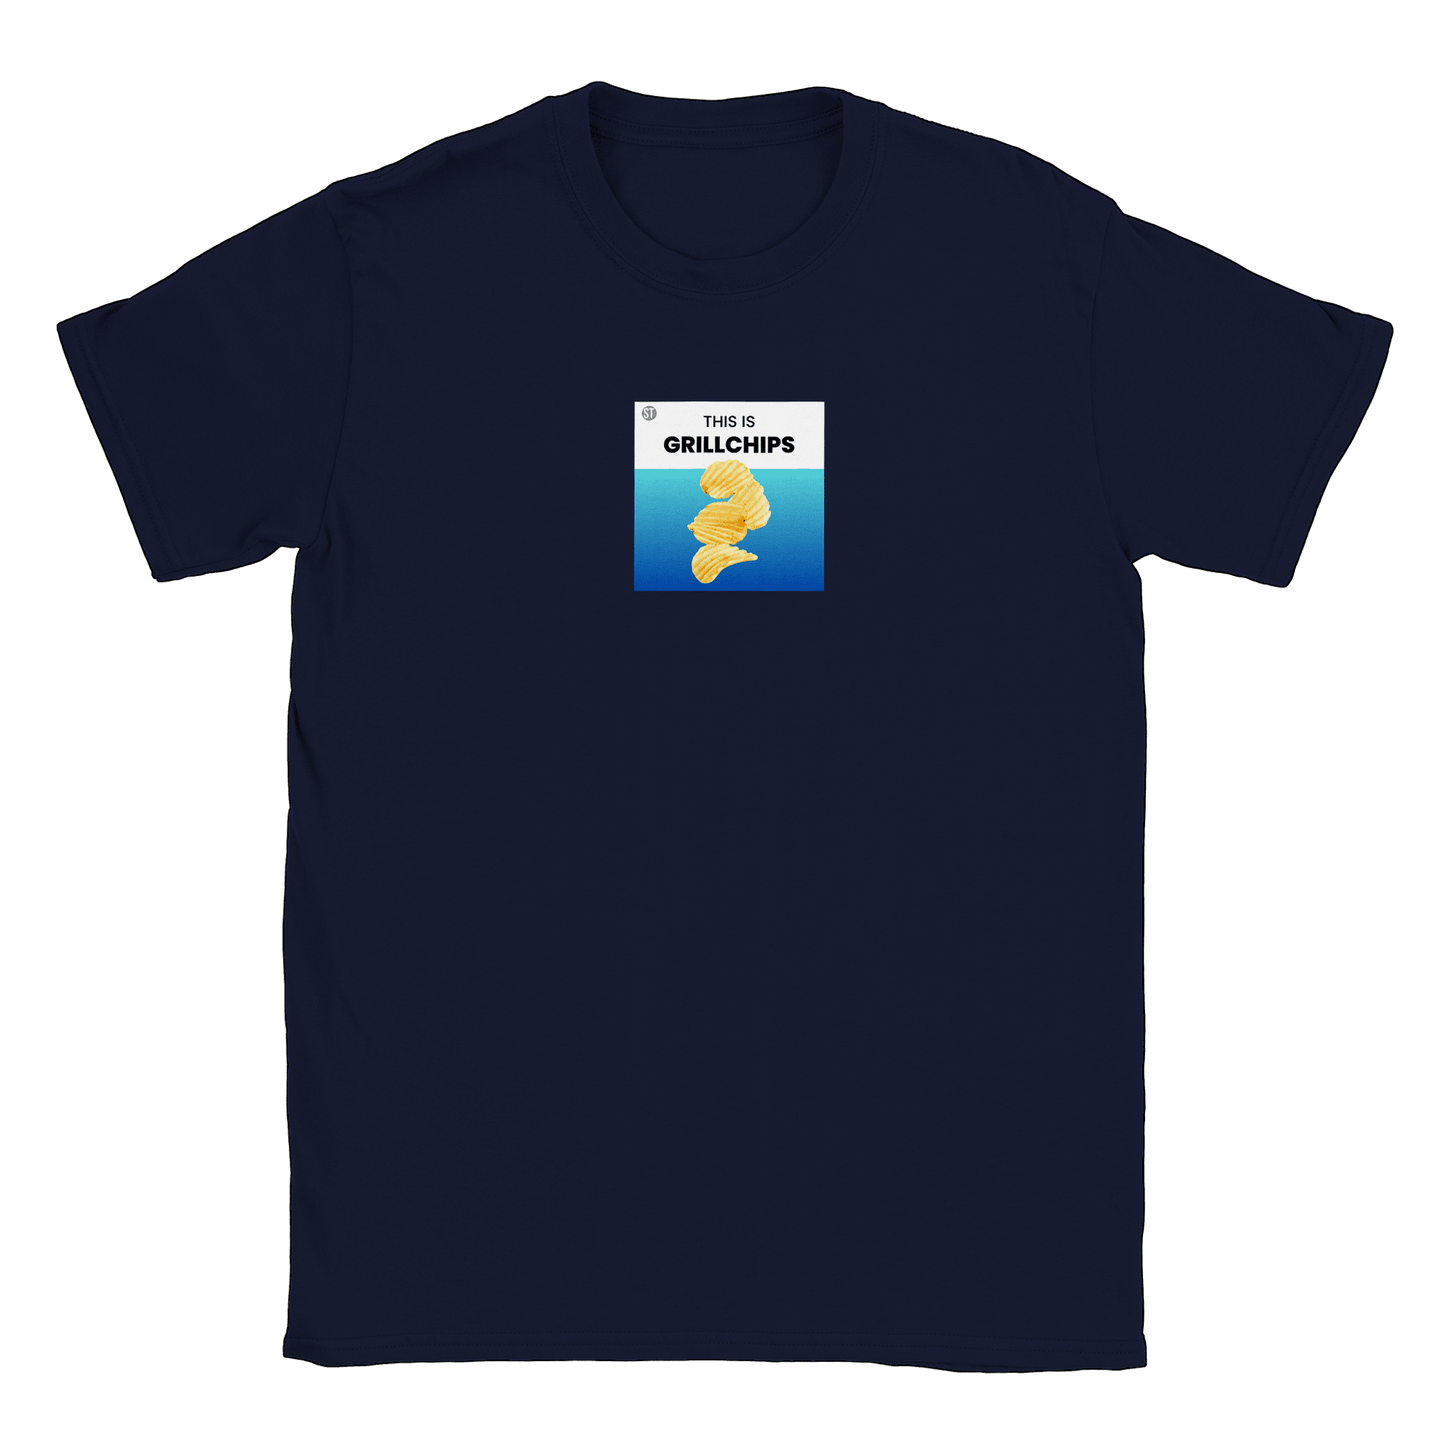 This is Grillchips - T-shirt Navy